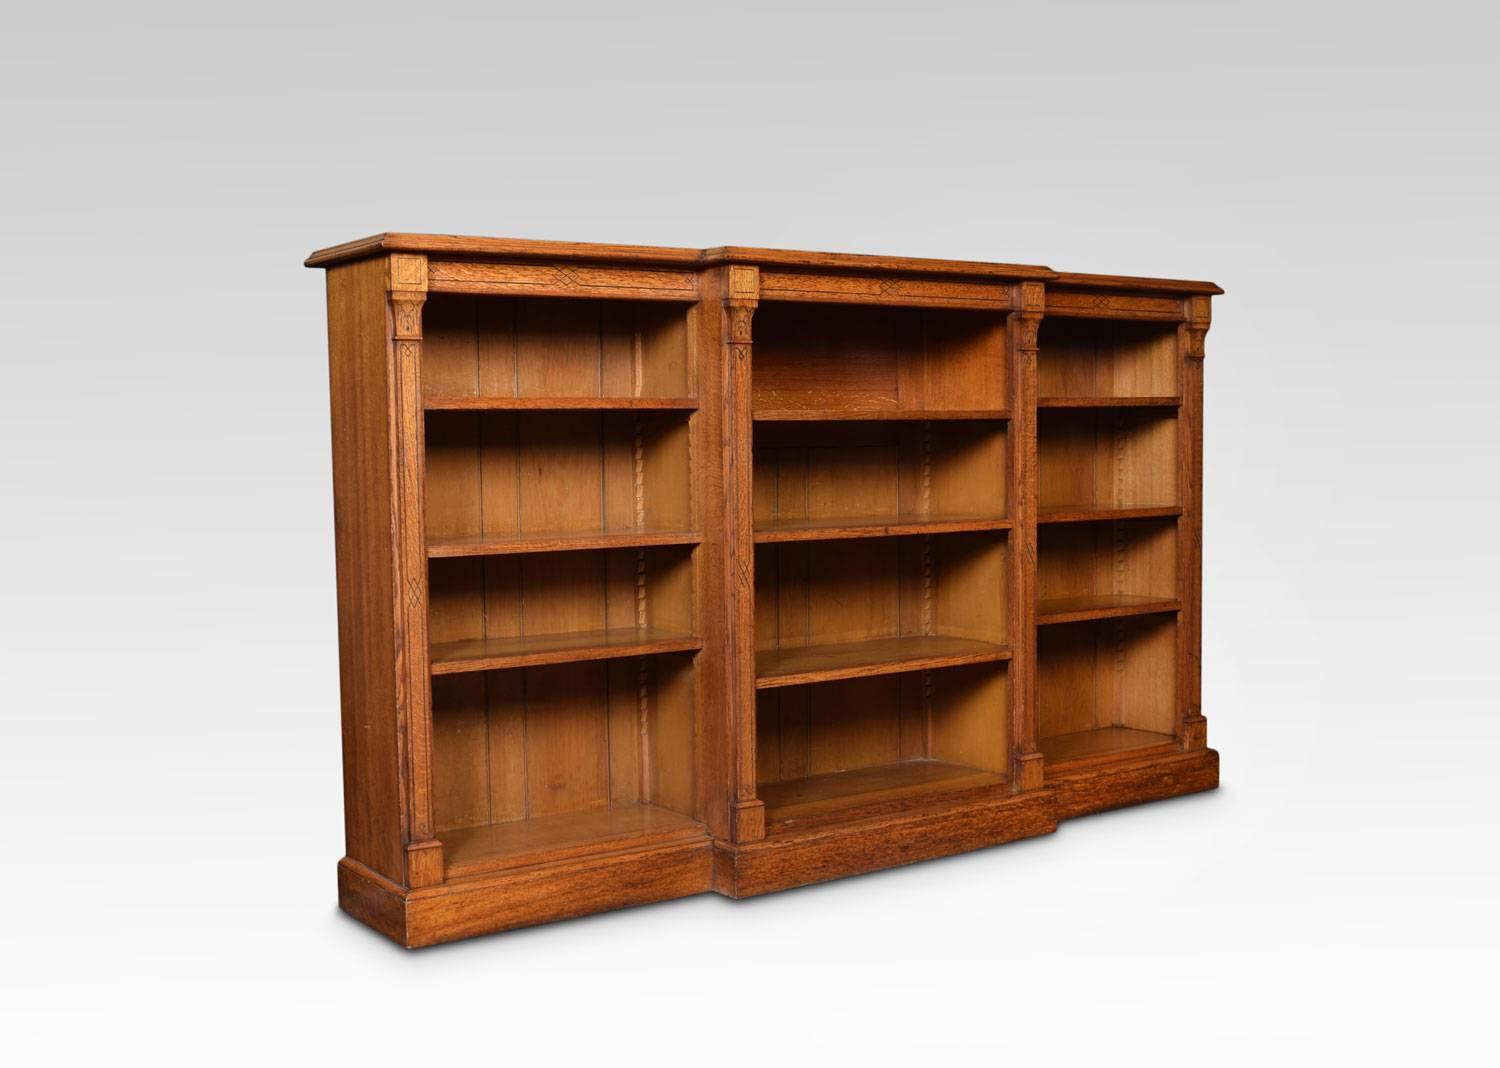 Reformed Gothic oak open breakfront bookcase, the large rectangular top above three bays of adjustable shelves divided by carved columns pilasters. All raised up on plinth base.
Dimensions
Height 48 Inches
Width 84 Inches
Depth 17 Inches